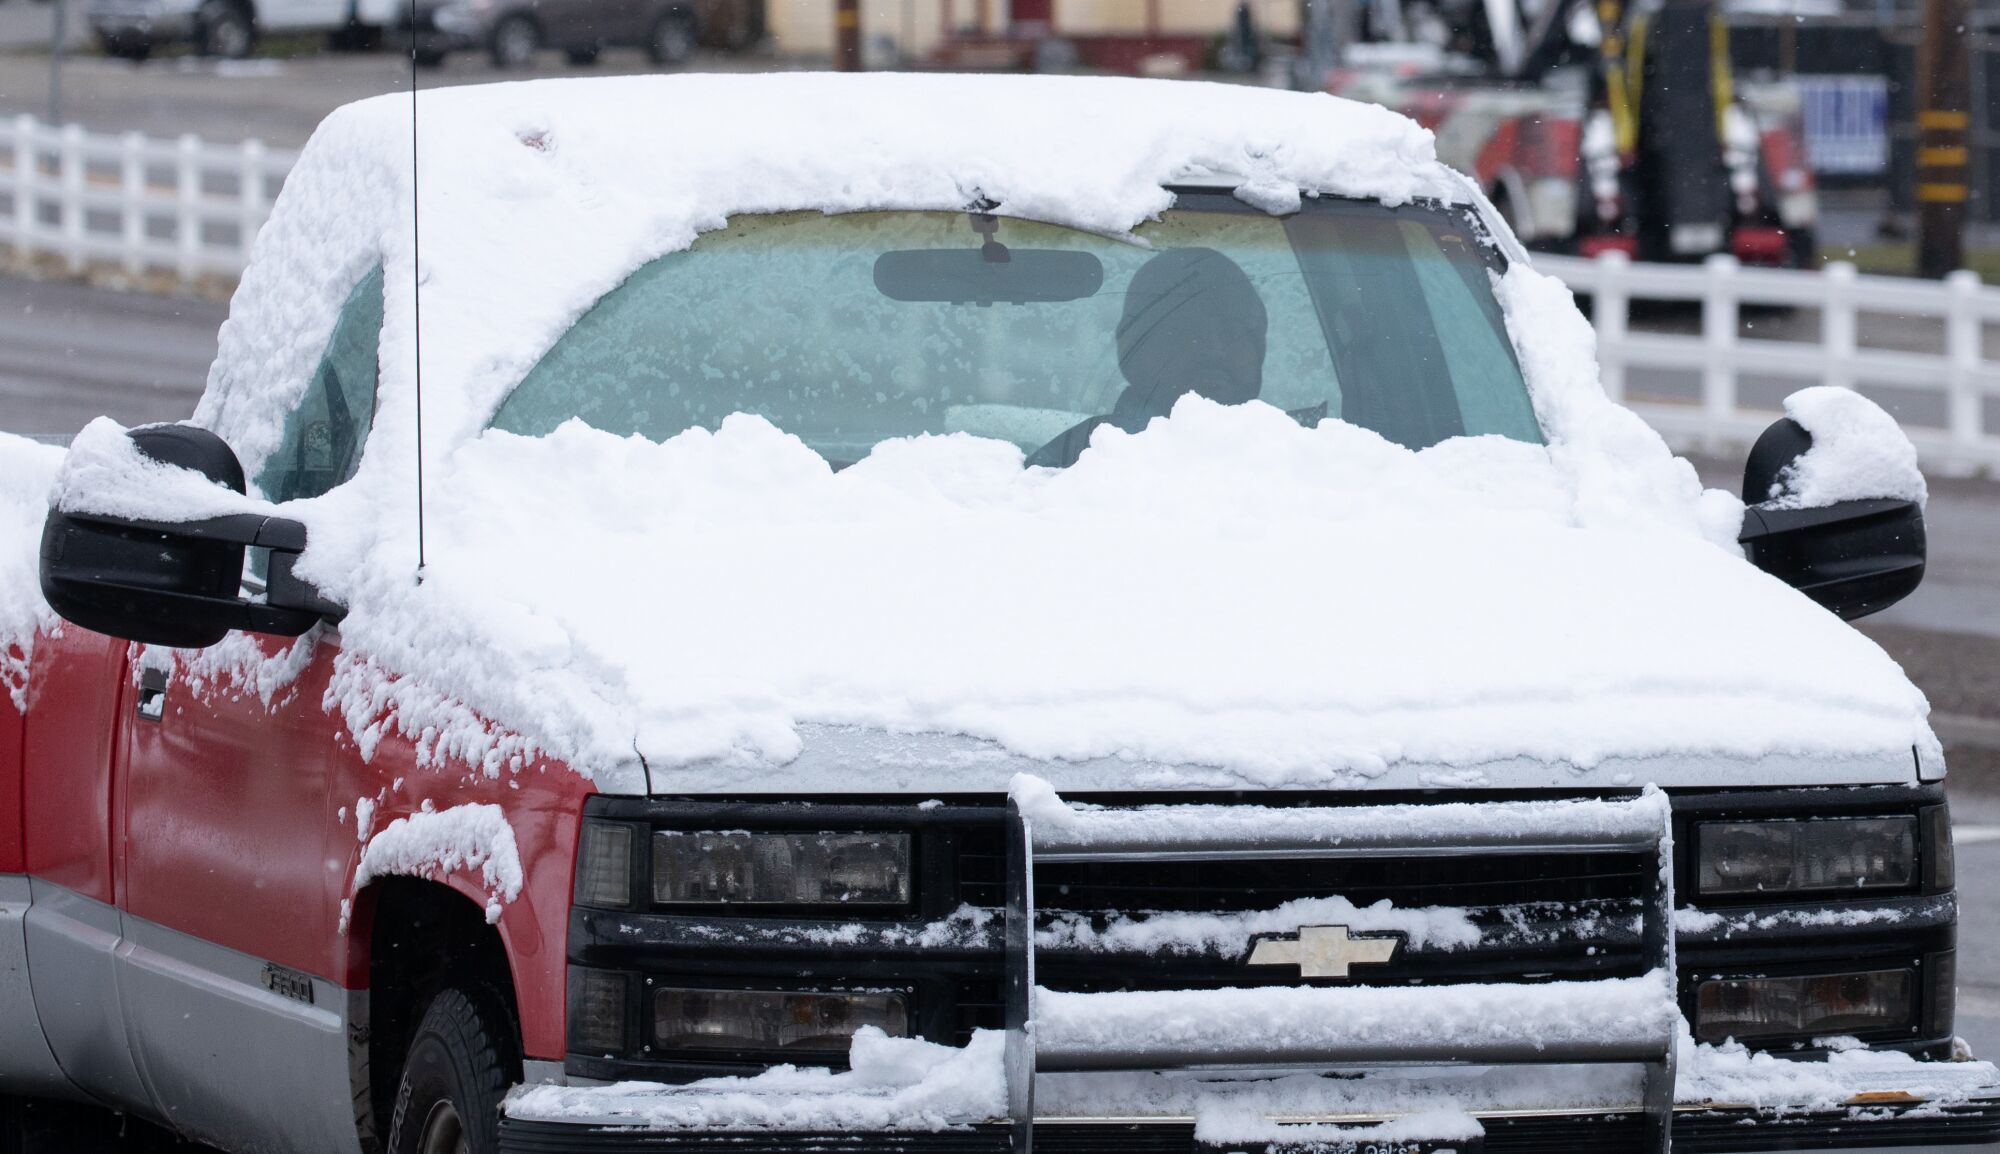 A motorist drives a pickup truck with its hood and roof covered in snow